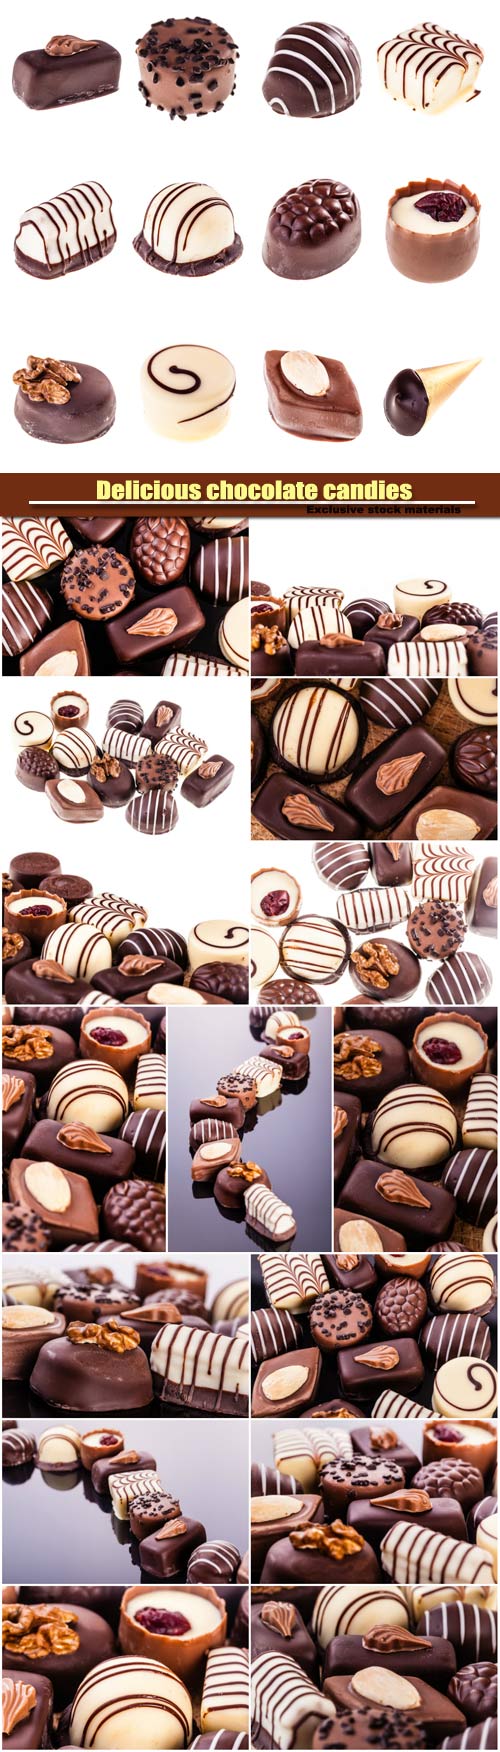 Delicious chocolate candies